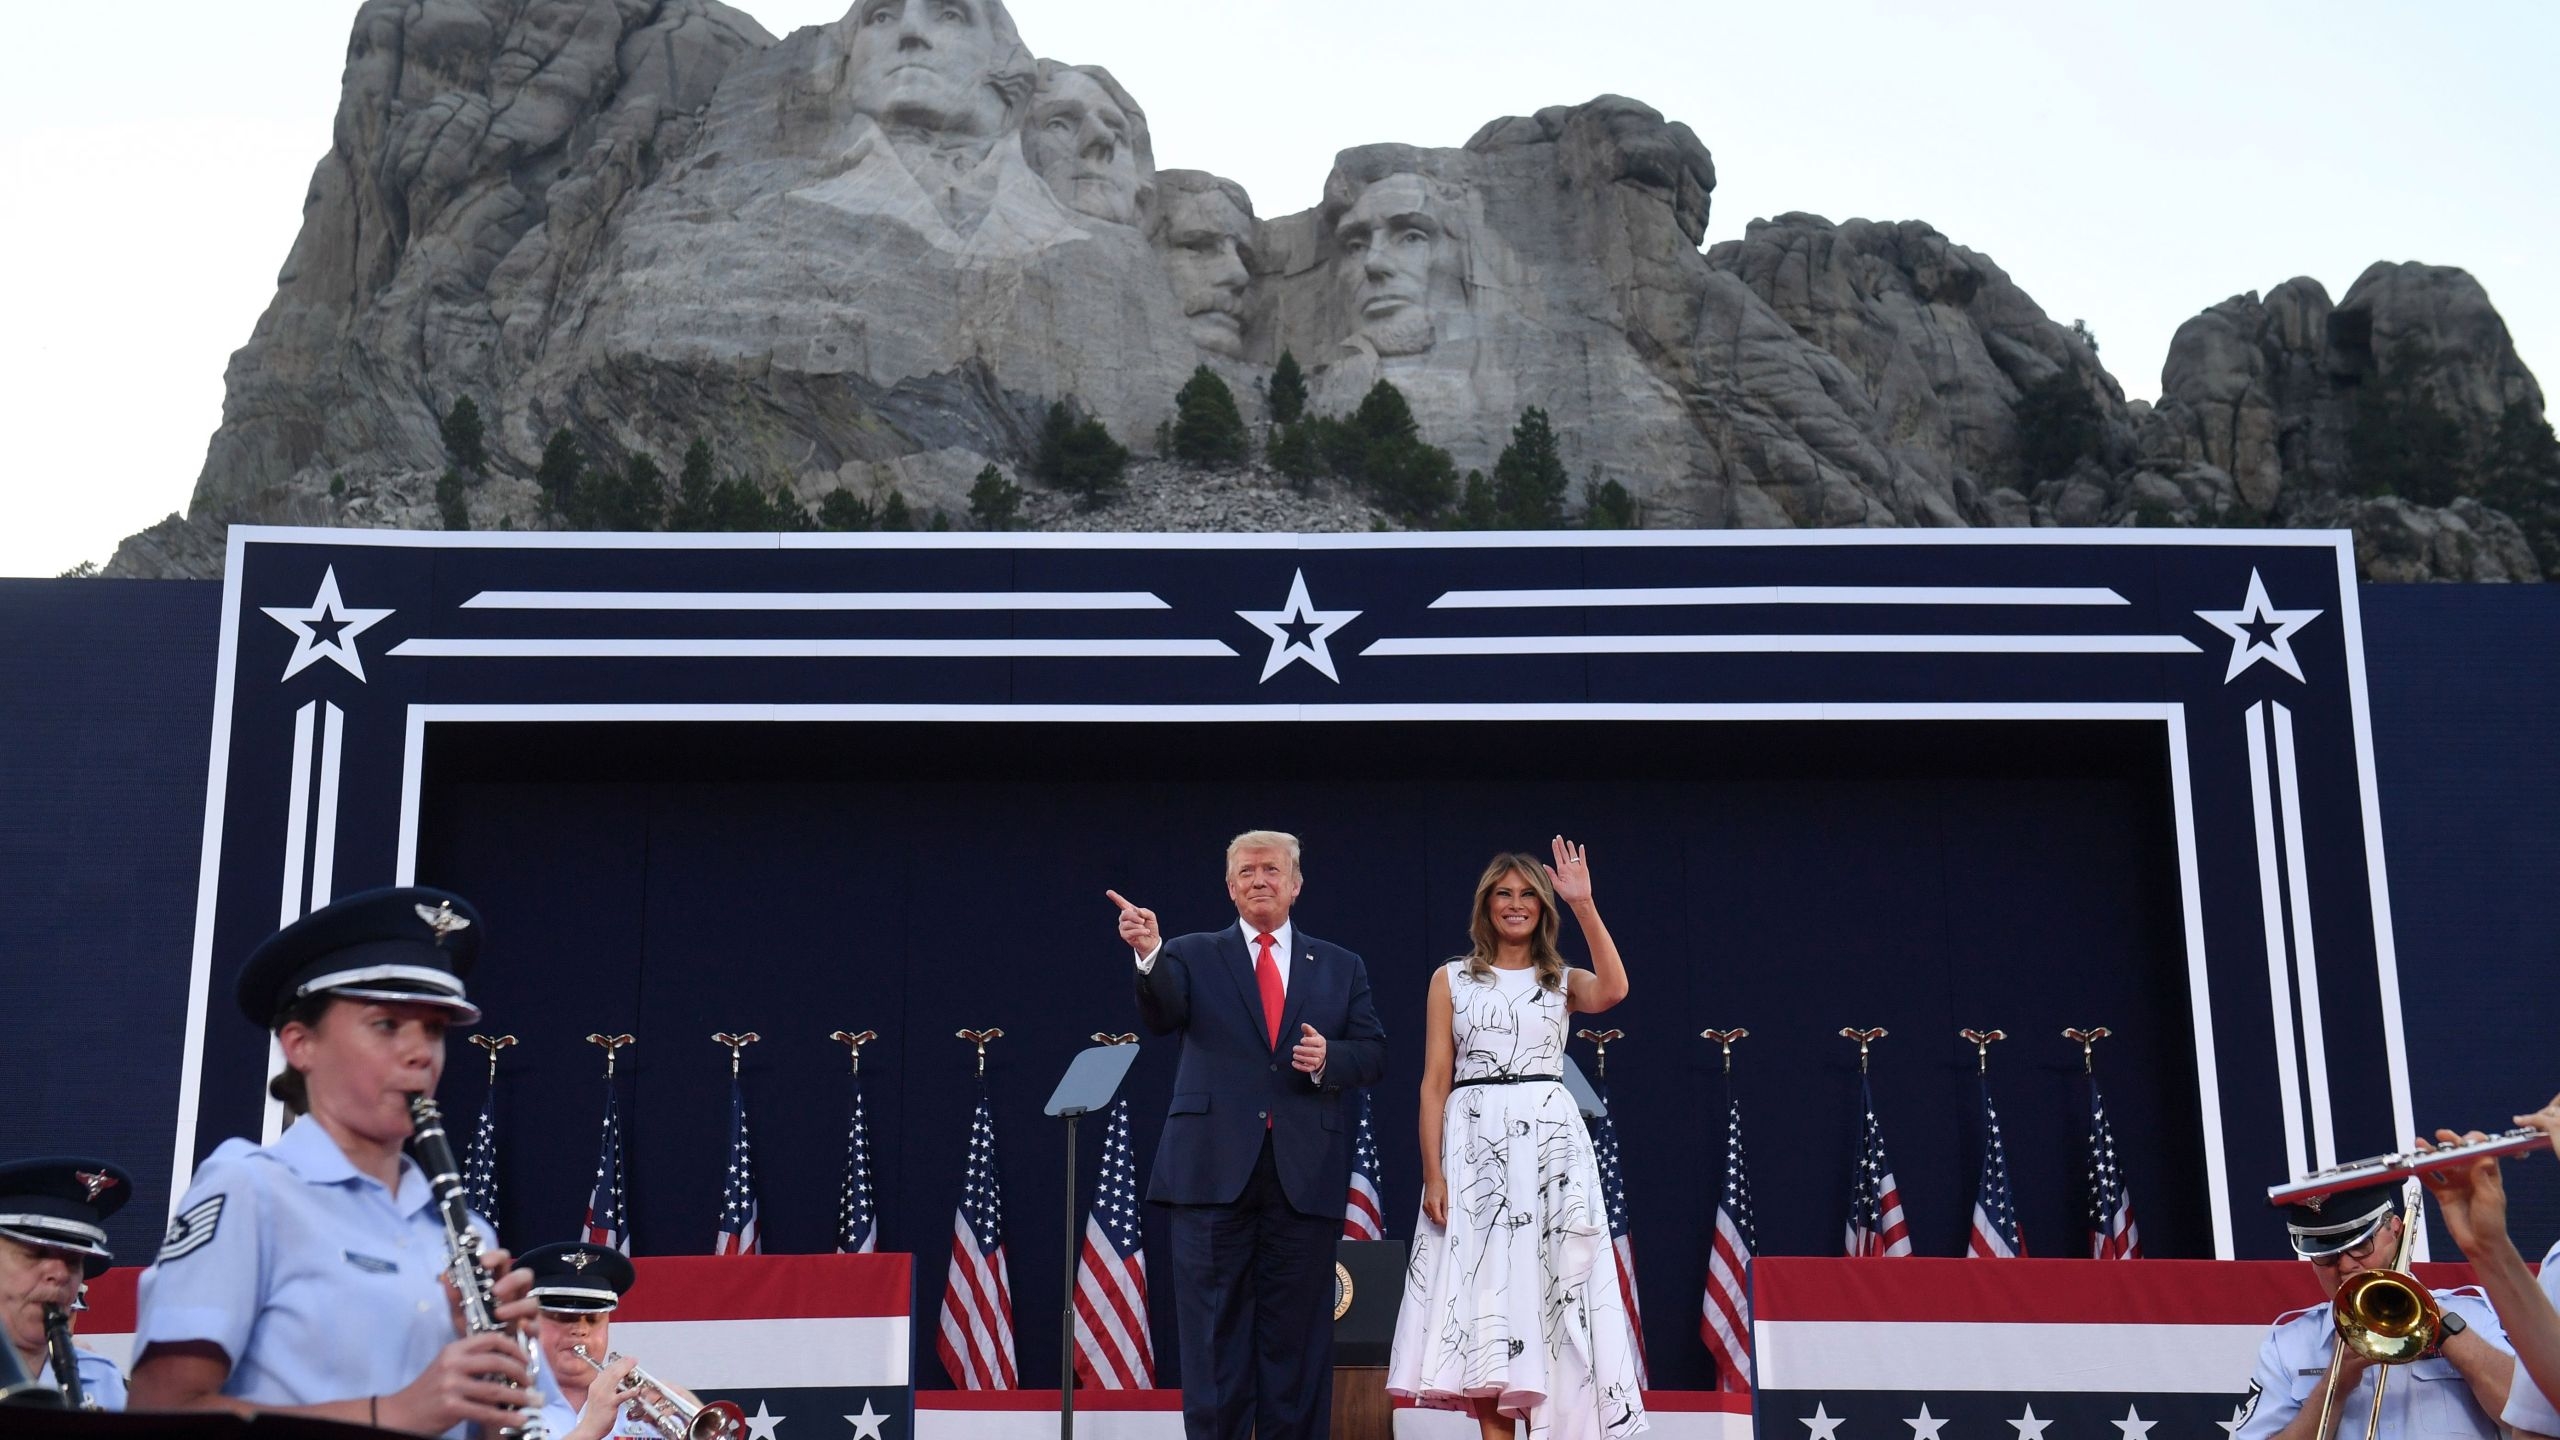 Trump gives speech in Mount Rushmore 4 July event